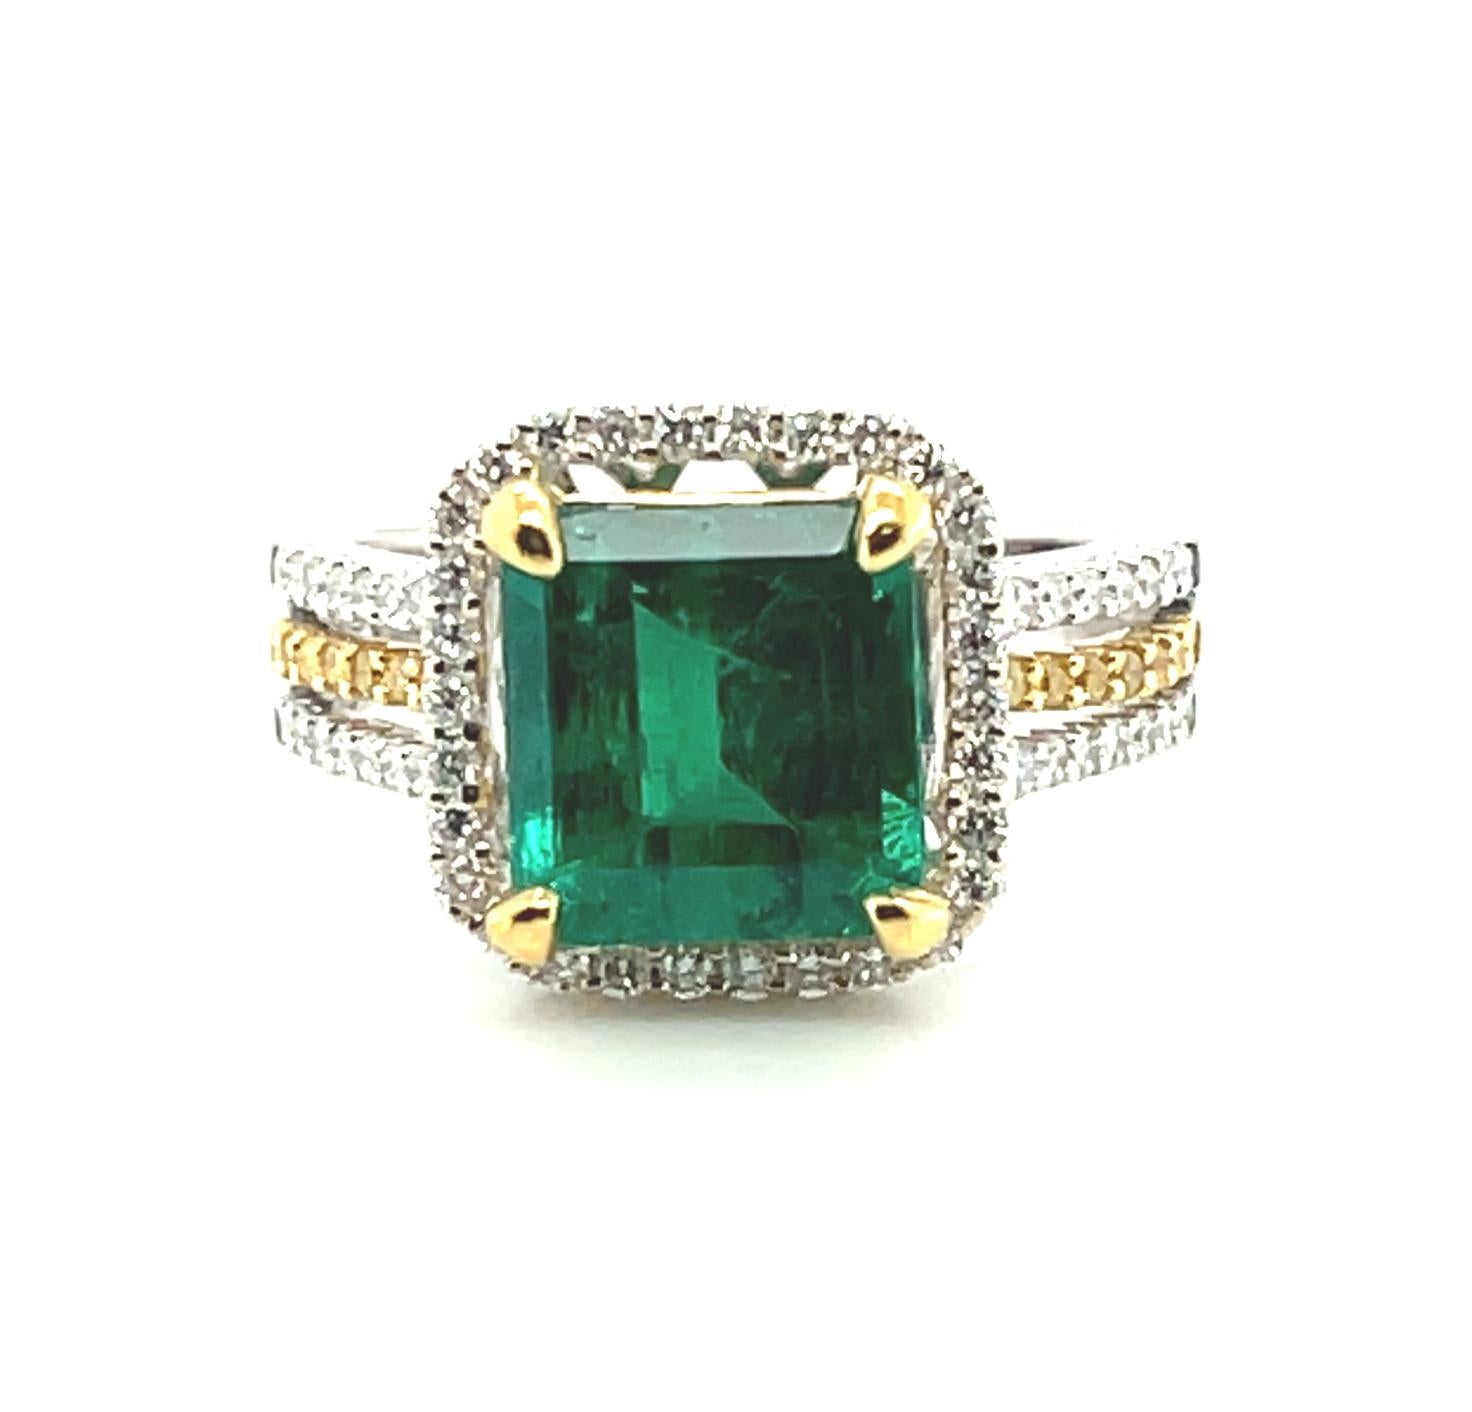 This beautiful cocktail ring features a deep, verdant green 2.85 carat emerald set in stunning 18k white and yellow gold. The center stone is framed by a halo of sparkling white diamonds and the band is set with both white diamonds and fancy, canary